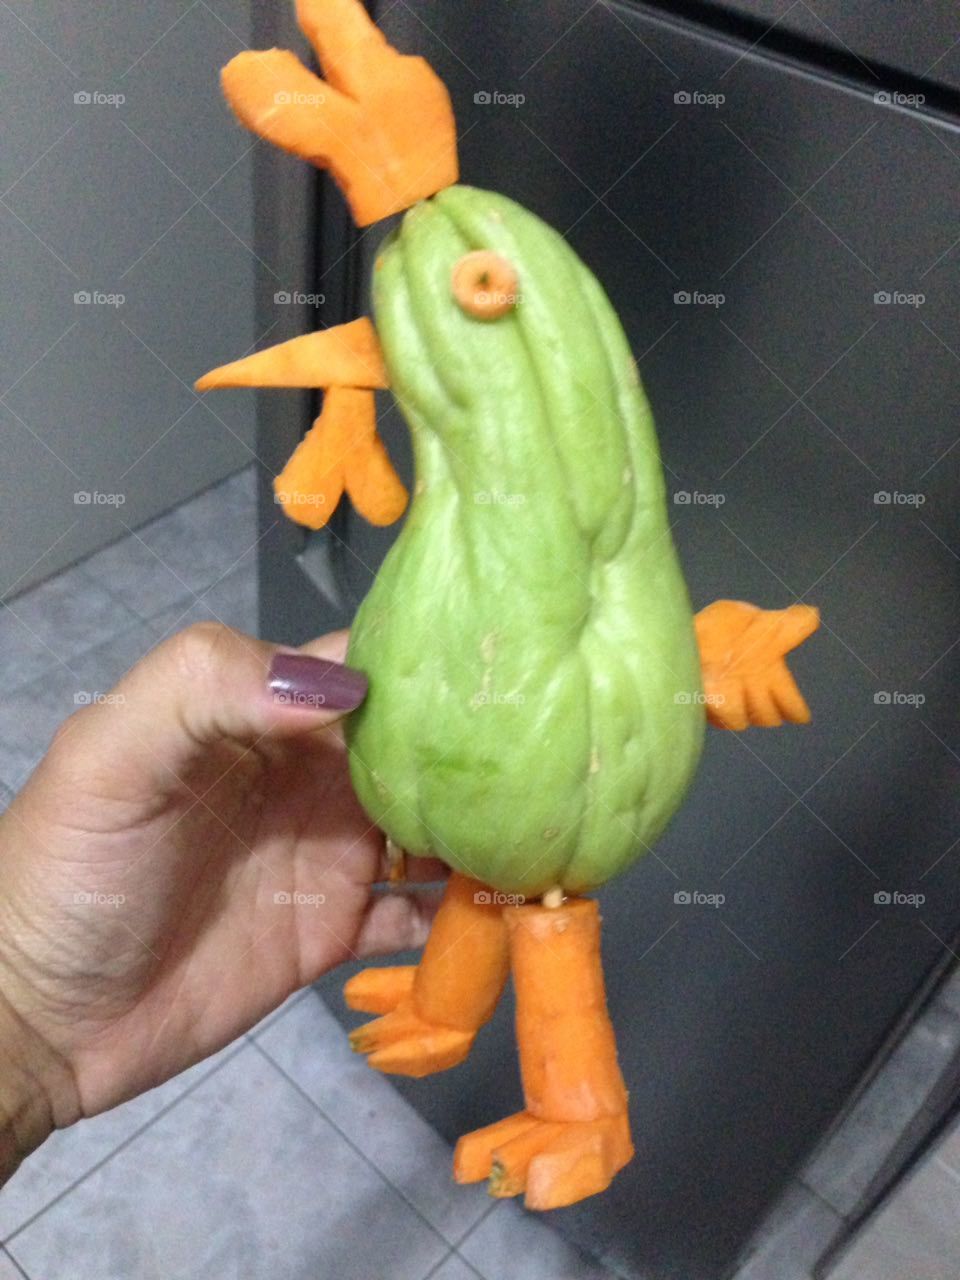 sculpture in legumes. Chayote and carrot   School work.